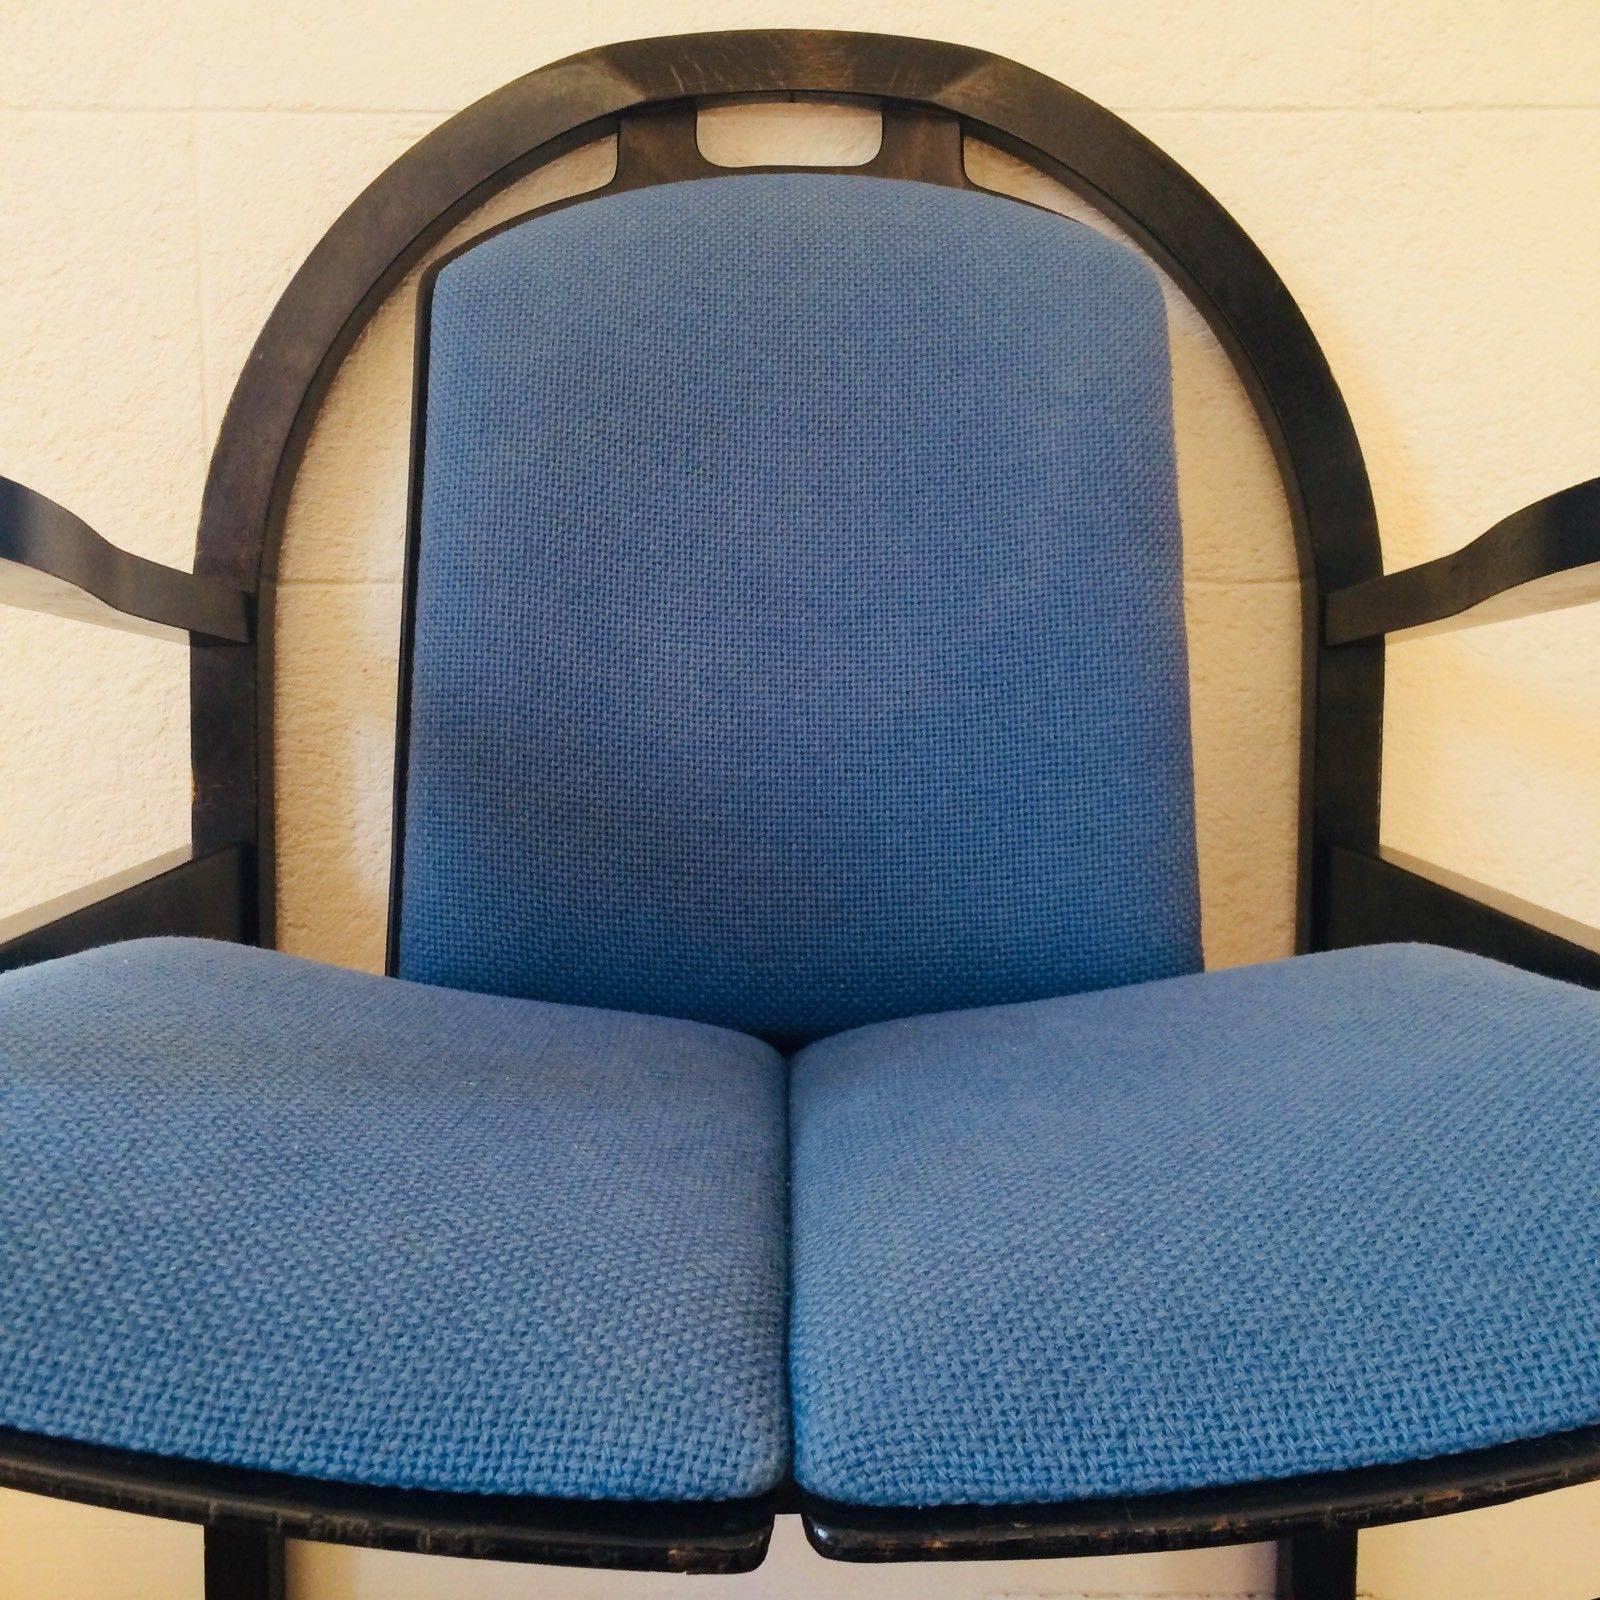 Baumann armchair model Argos,
circa 1978.
Black stained beech.
Original woollen cushions very good condition
Blue
One small snag on a cushion
Measures: H 86 X L 61 x D 63 cm
seat 46 cm.
Very decorative.
Excellent original condition.